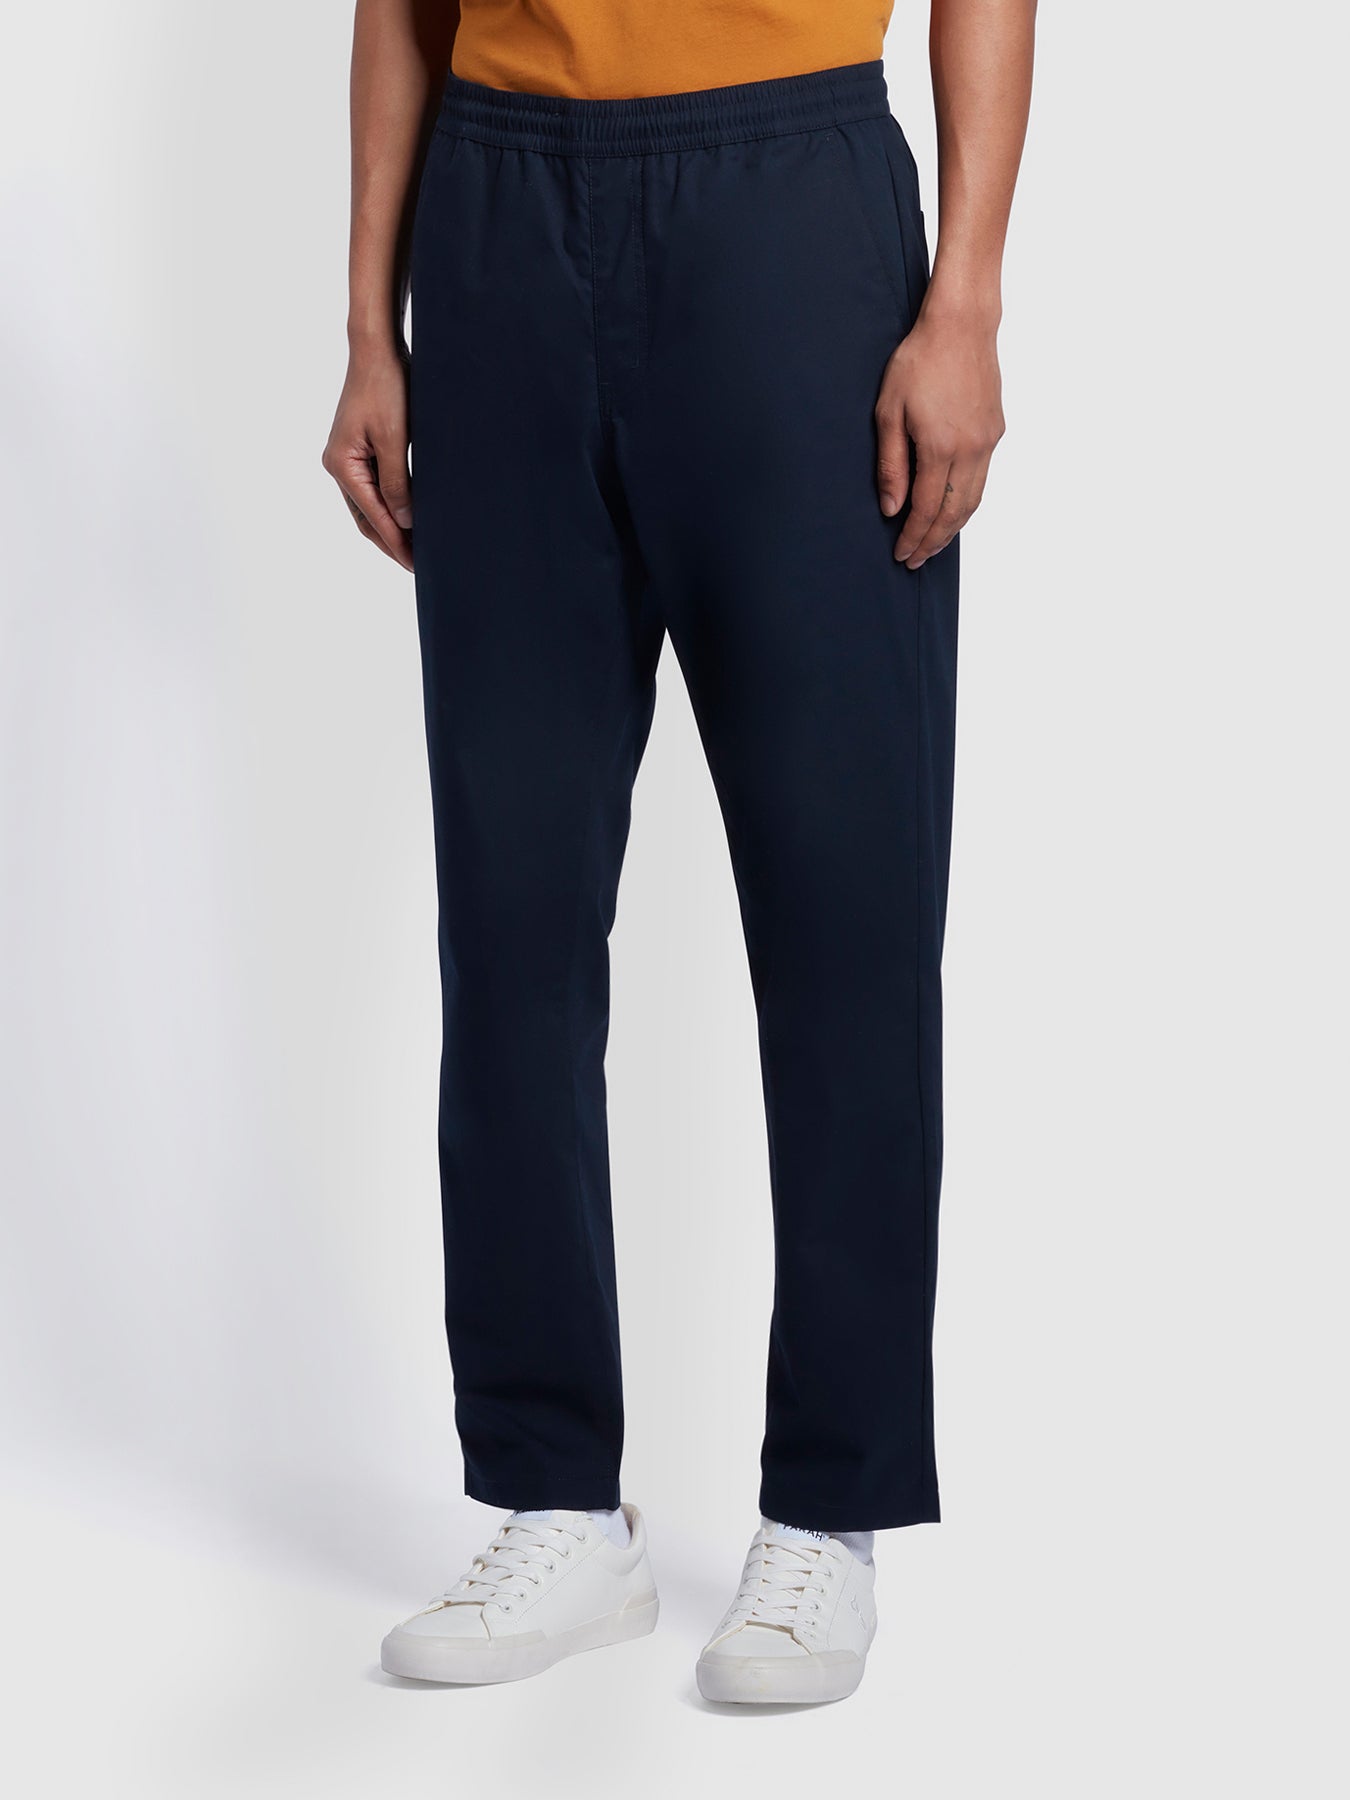 View Rushmore Regular Fit Canvas Drawstring Trousers In True Navy information